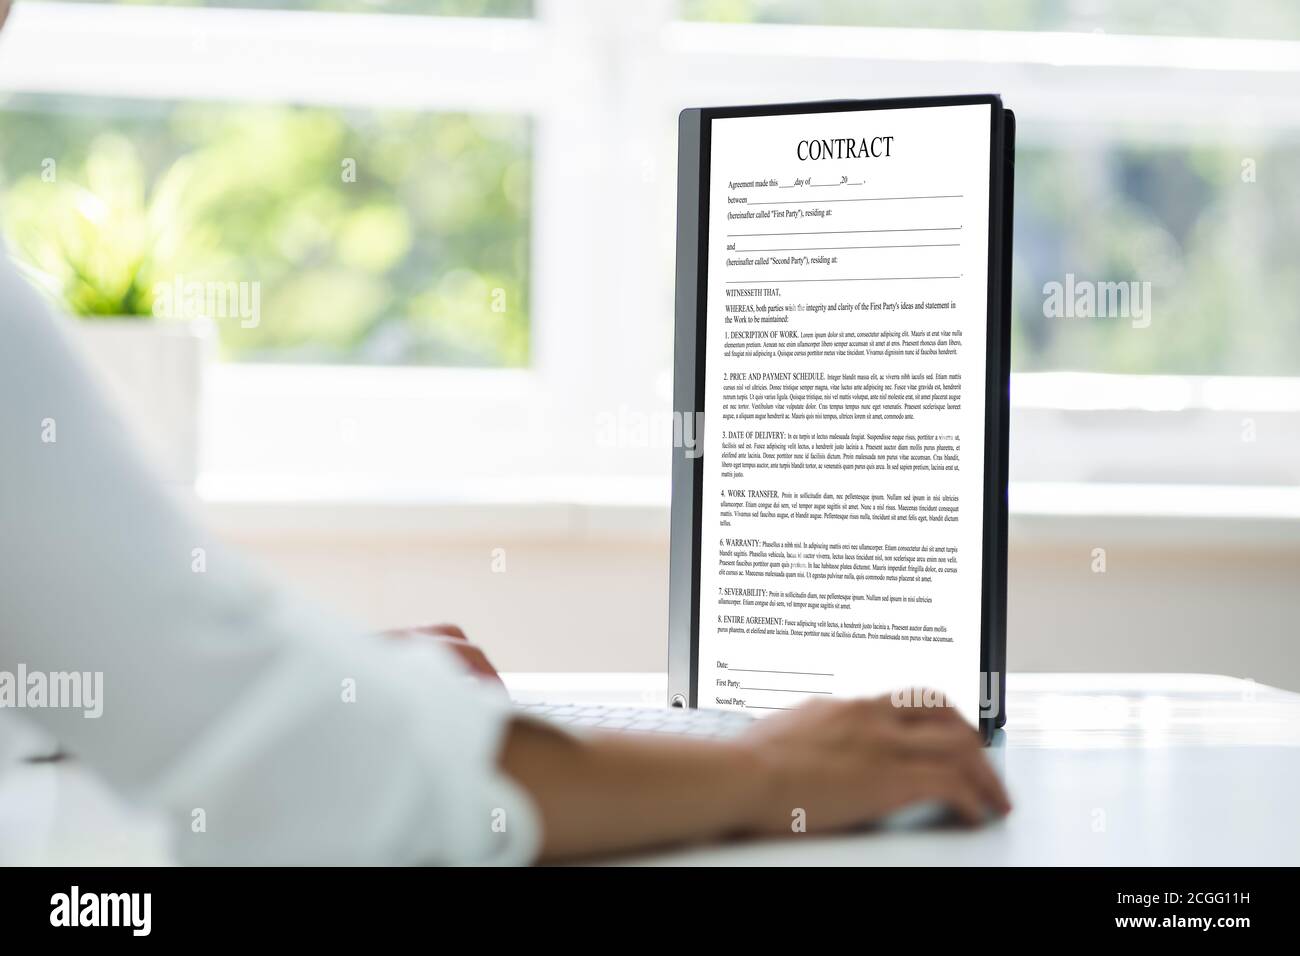 Employee Job Application Contract On Computer. Banking And Finance Stock Photo